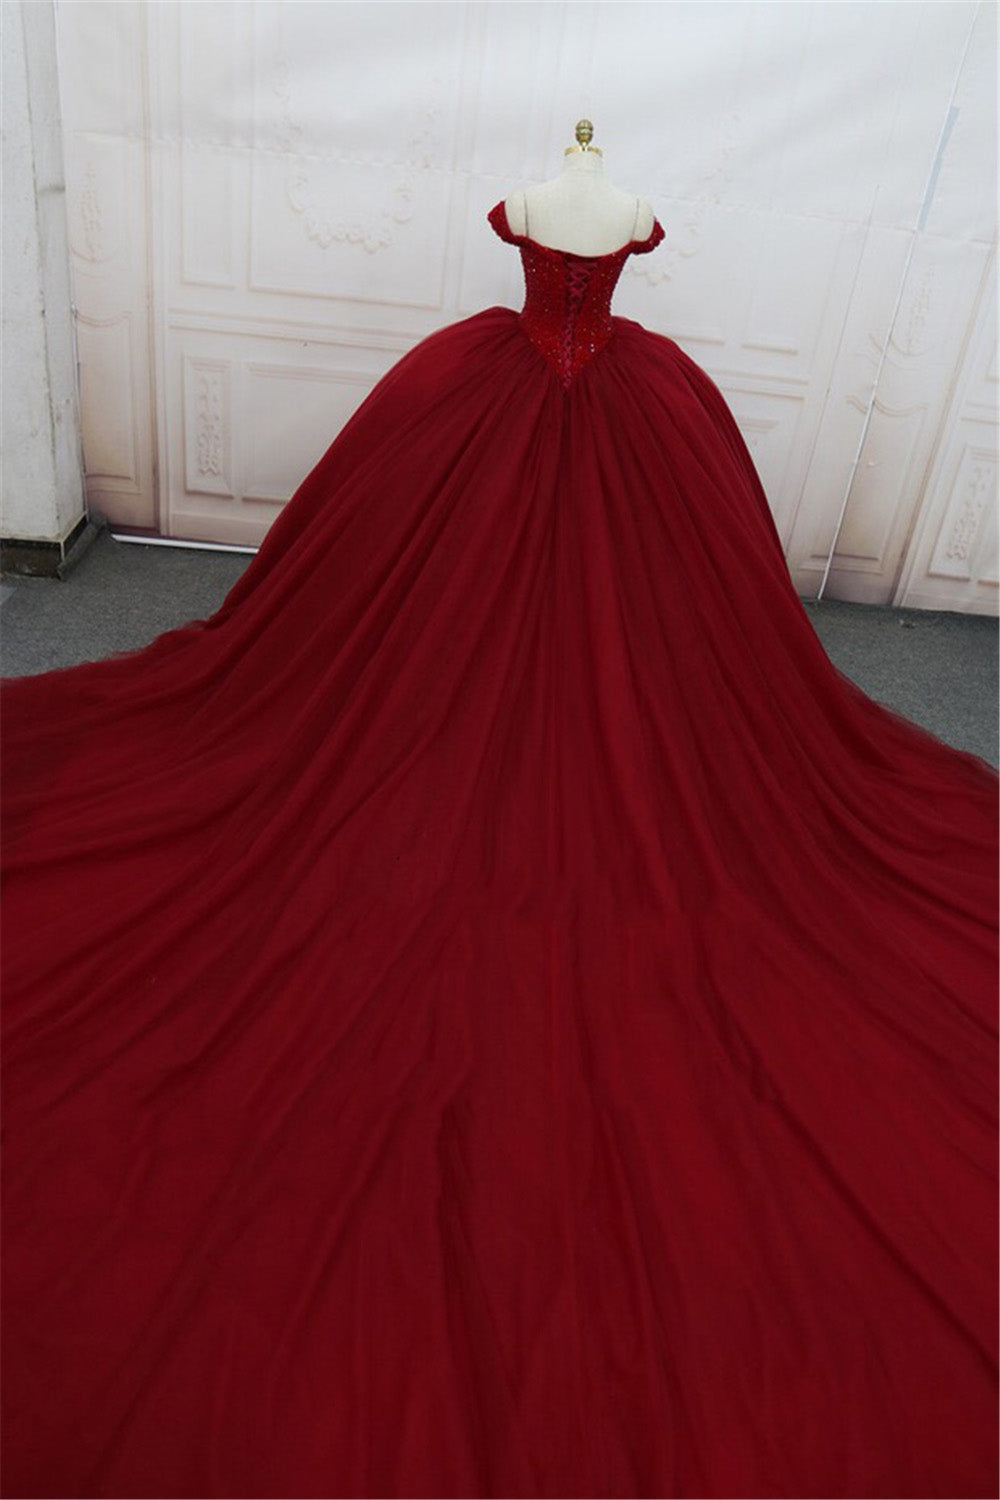 Luxury Beading Prom Dresses Off the Shoulder ball Gown Wedding Gown 2019